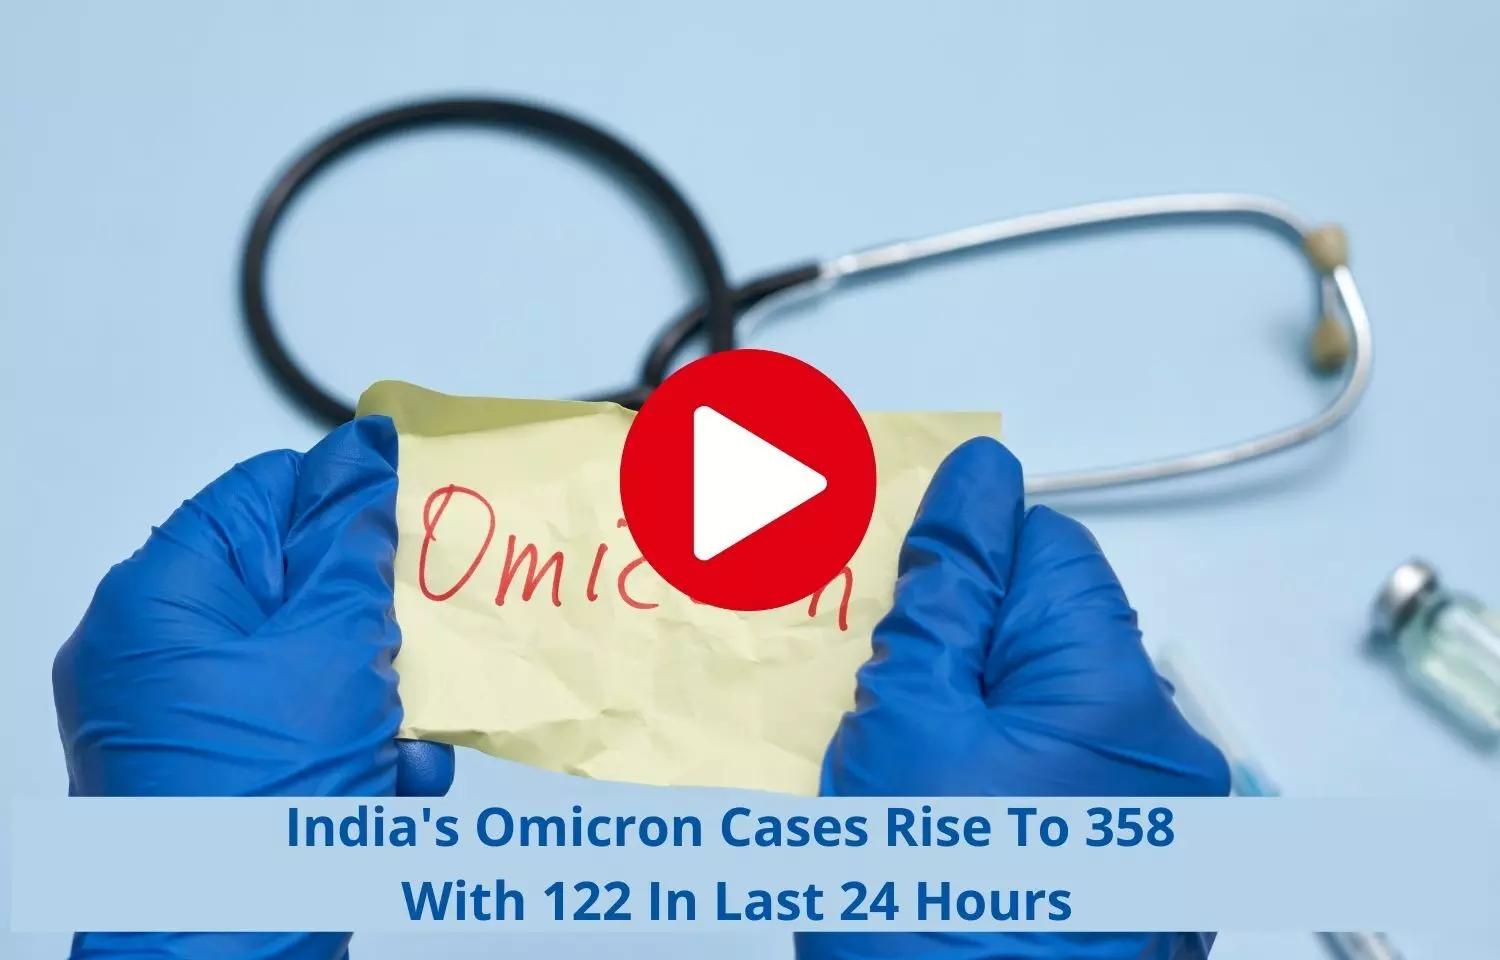 Indias Omicron cases rise to 358 with 122 in last 24 hours